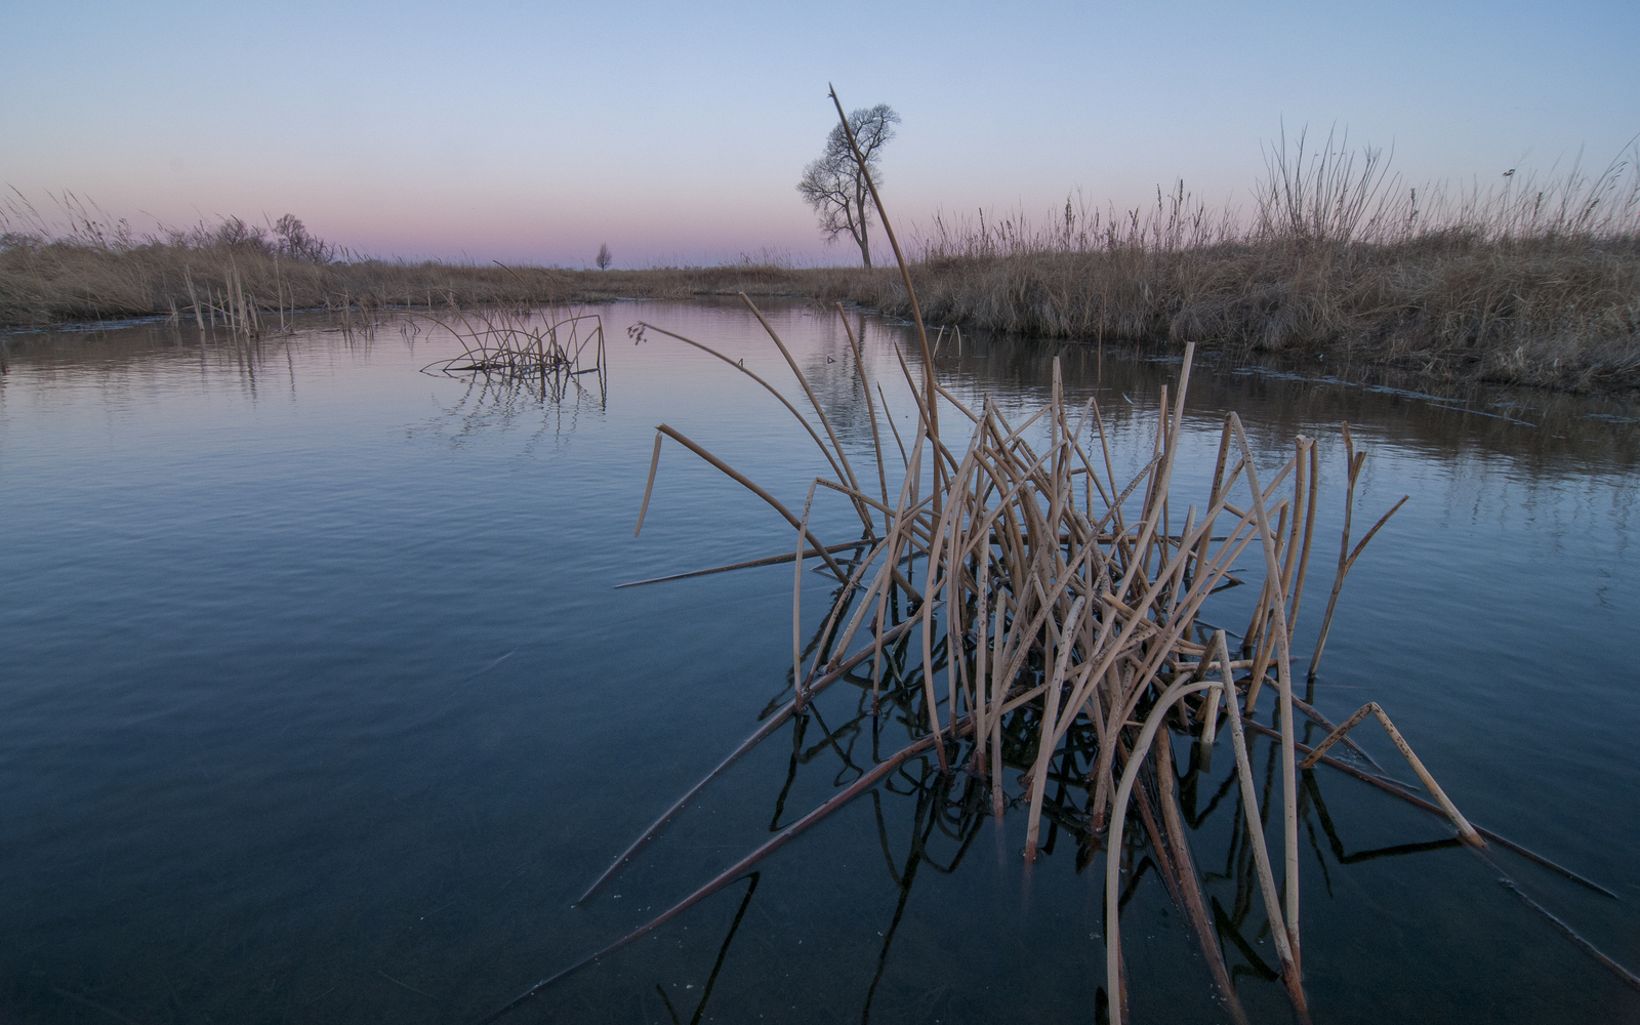 Brown grasses spot the surface of the Platte River as the dawn sky reflects pinks and yellow colors on its still shoreline.